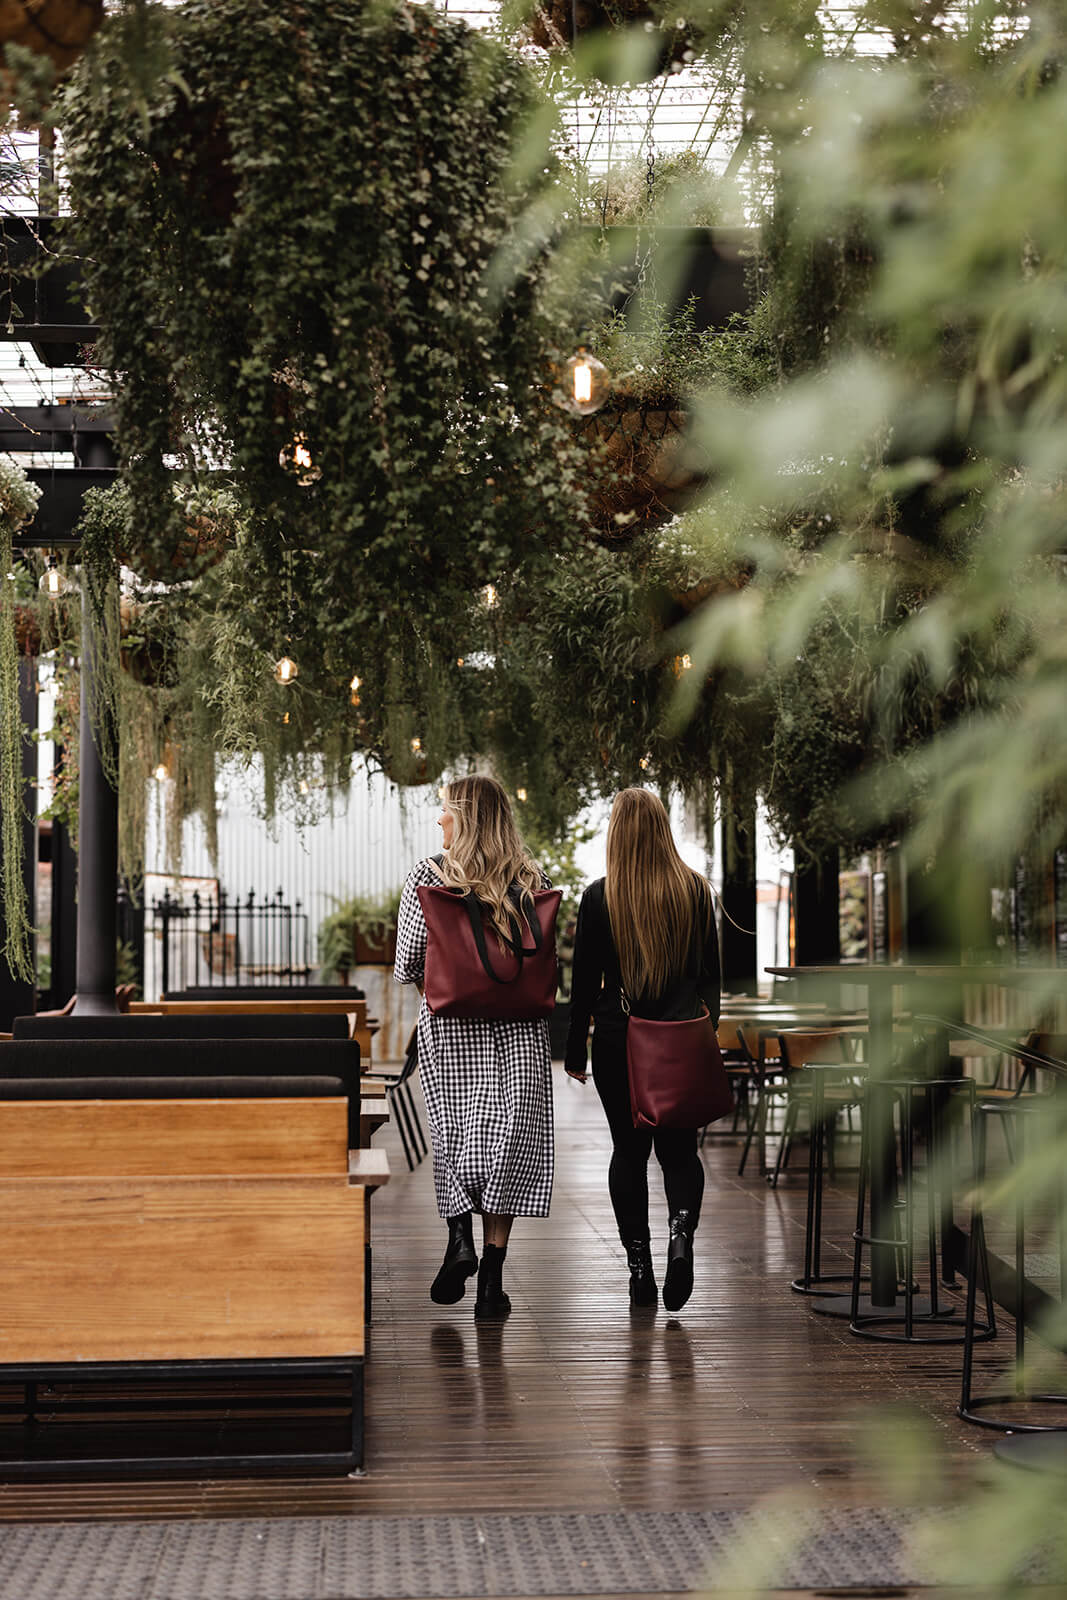 Beautiful open bar with with many hanging plants and greenery. Two woman are walking through the space wearing cherry leather bags by Ella Jackson. The woman on the left is wearing the Cherry Leather Backpack & Tote; the woman on the right is the Cherry Leather Carryall